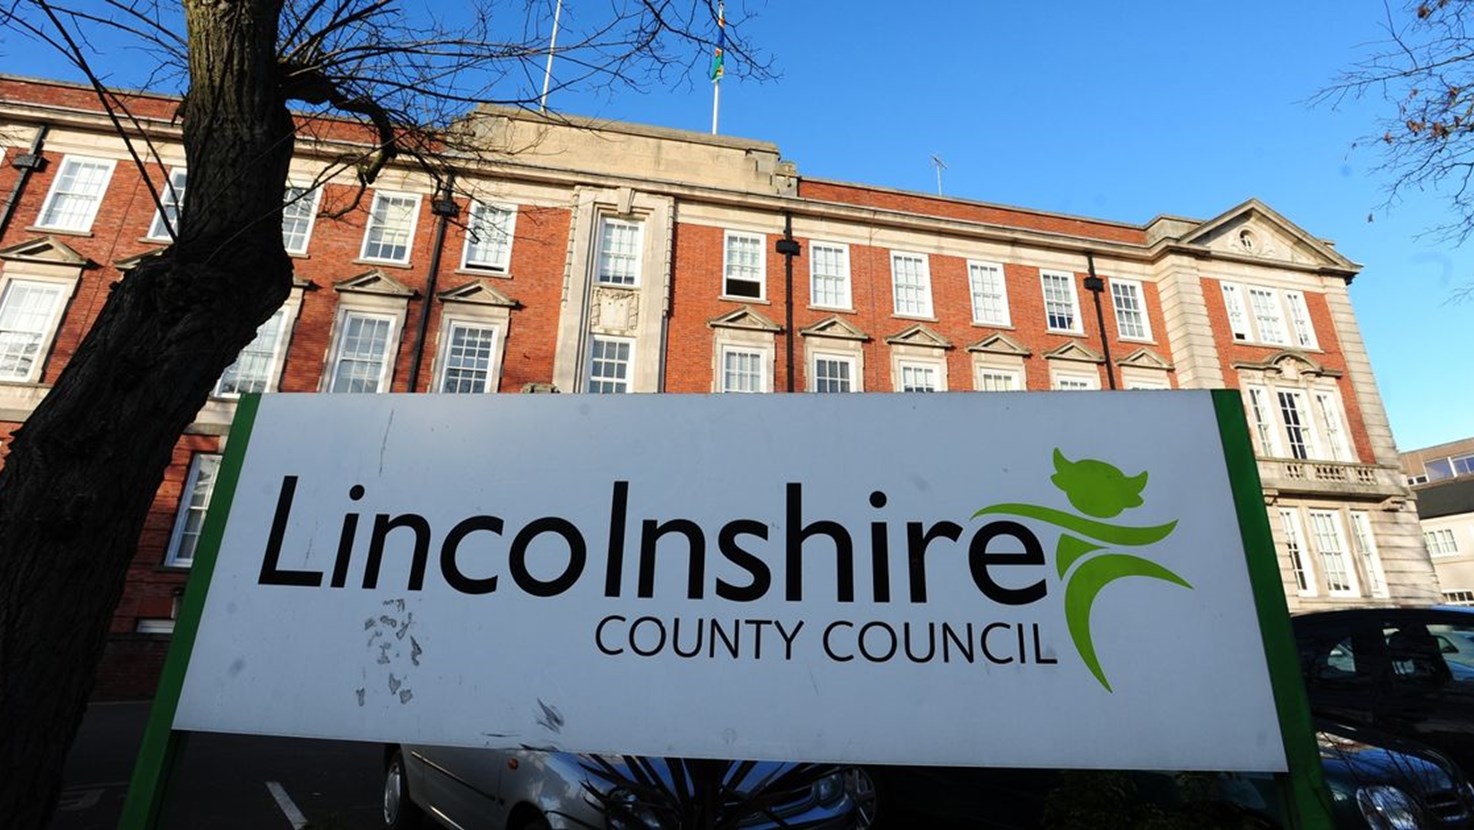 View all of the events and meetings that PCC Marc Jones attended at Lincolnshire County Council in 2022